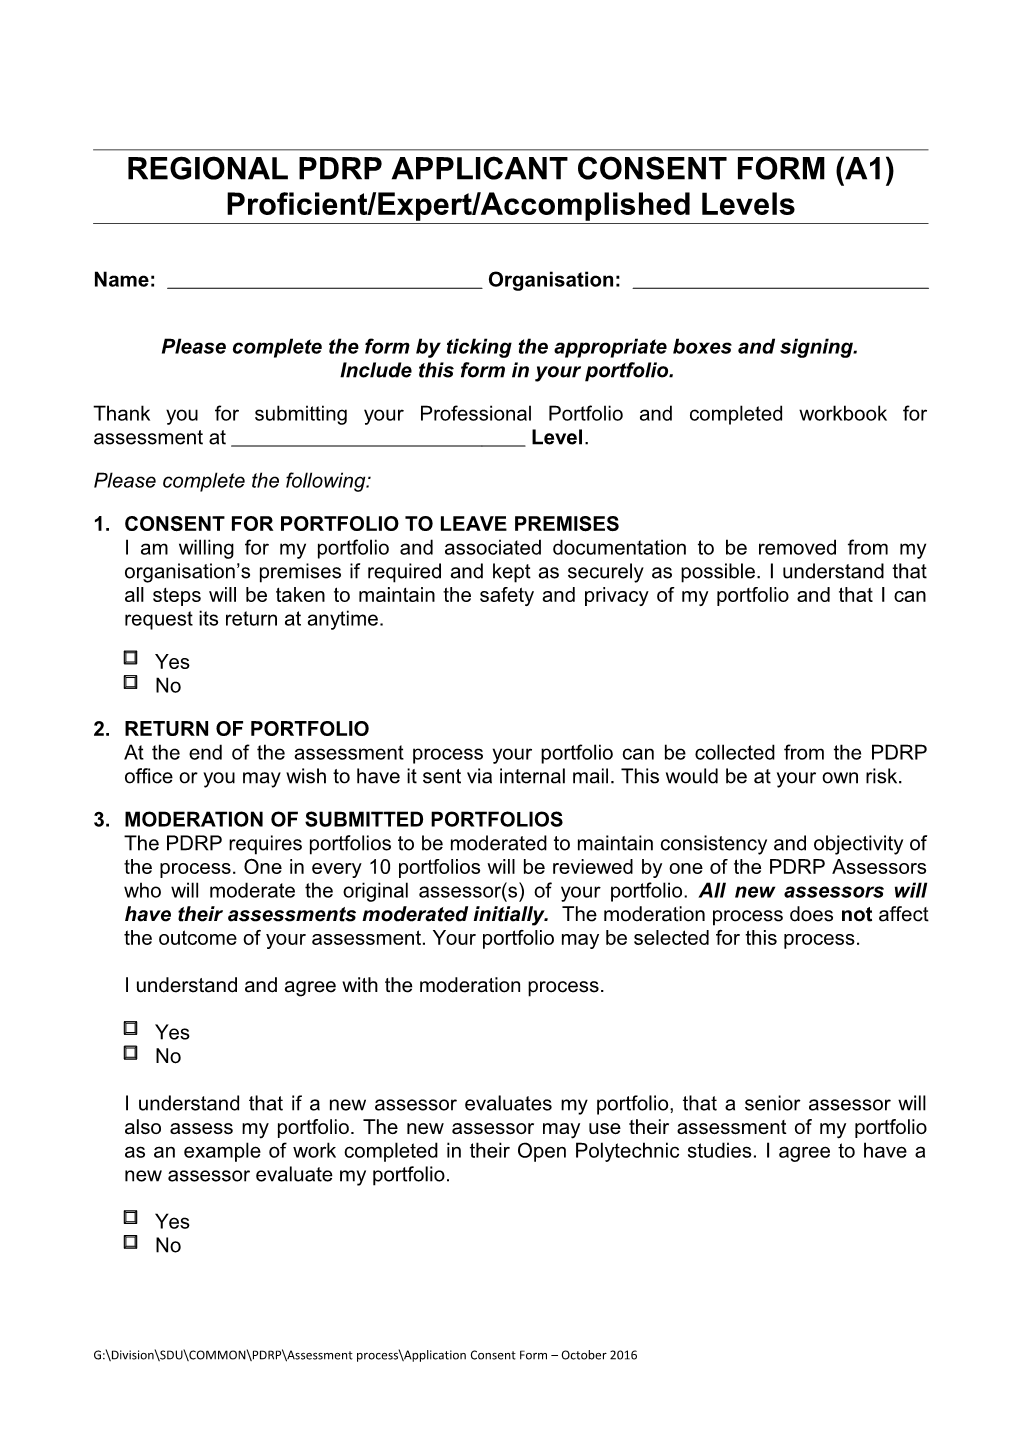 Regional Pdrp Applicant Consent Form (A1)